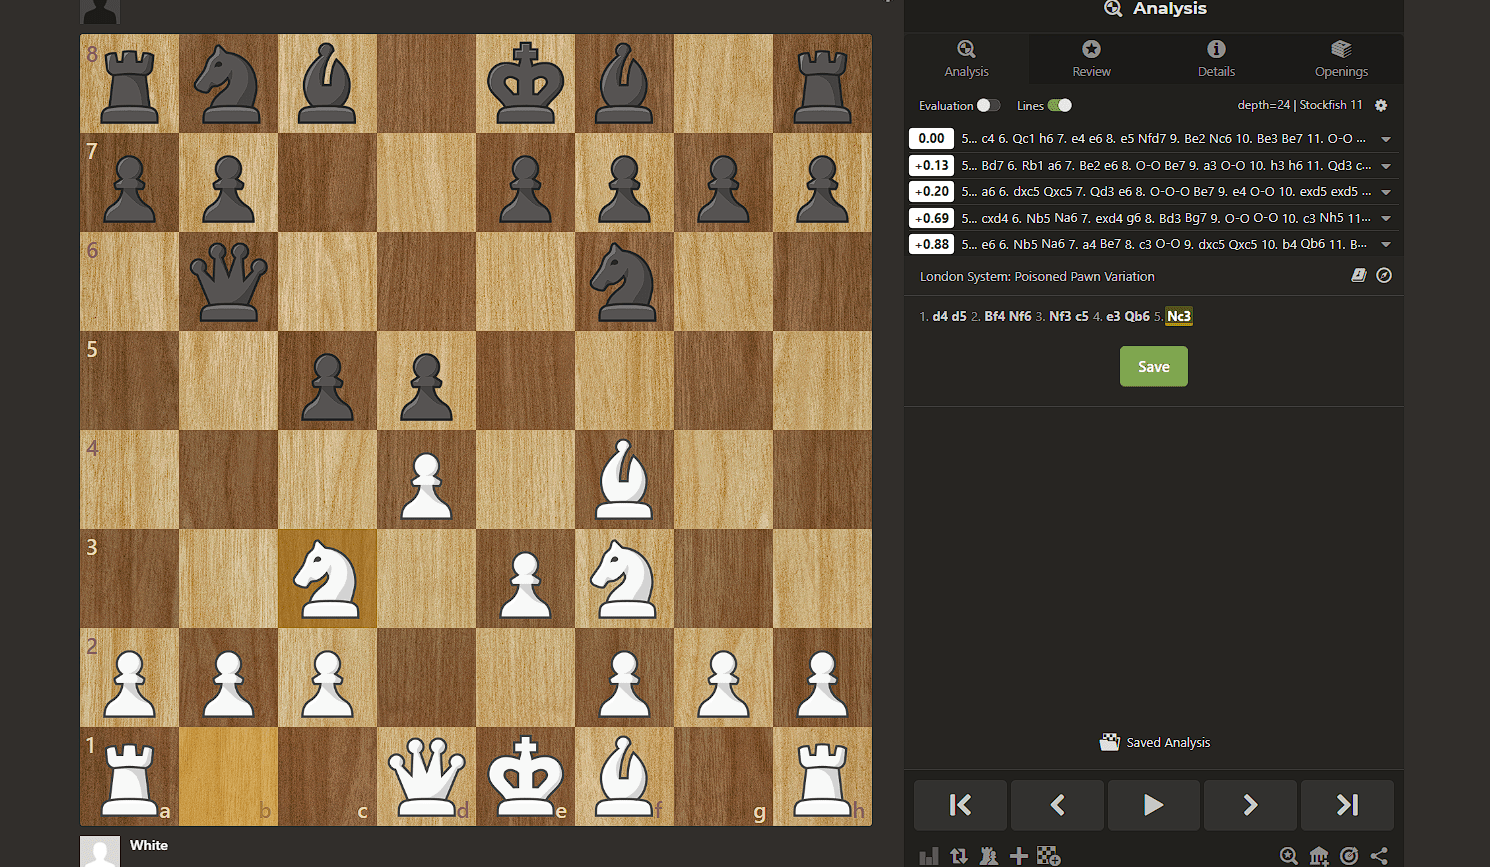 How about a nice game of Chess with Lichess